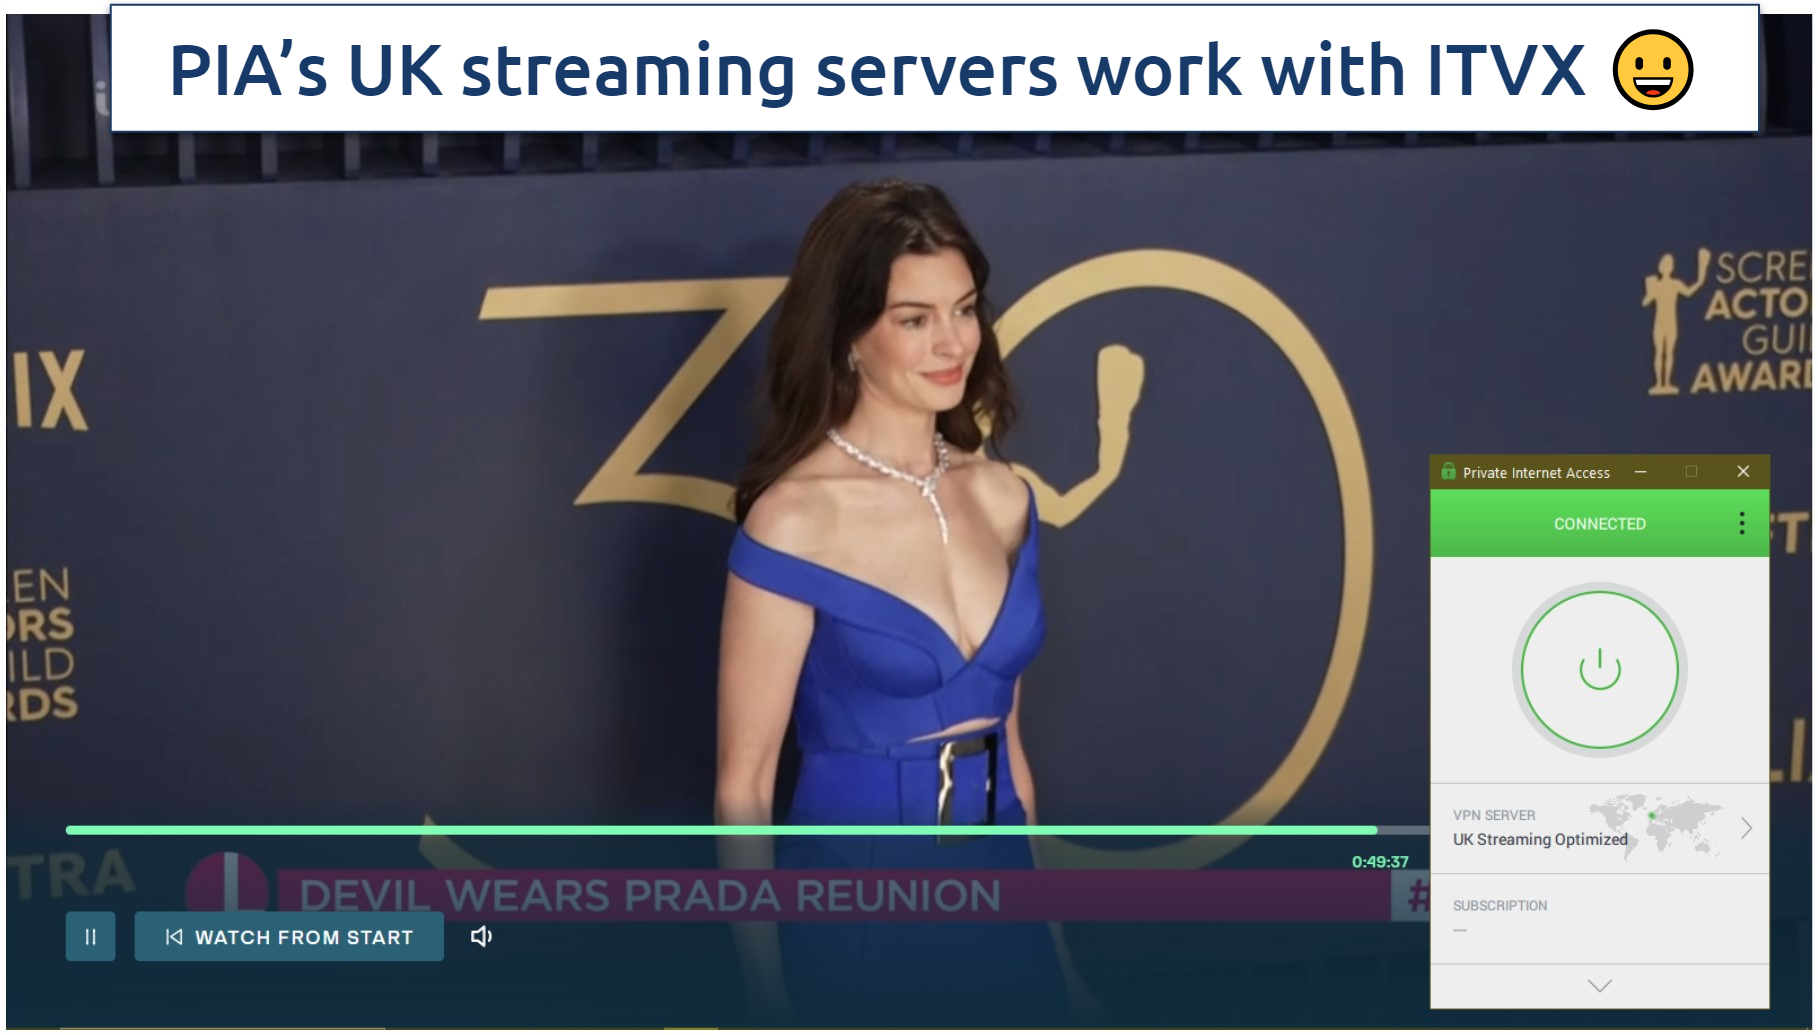 The Oscars Live channel on ITVX with PIA connected to a streaming-optimized server in the UK